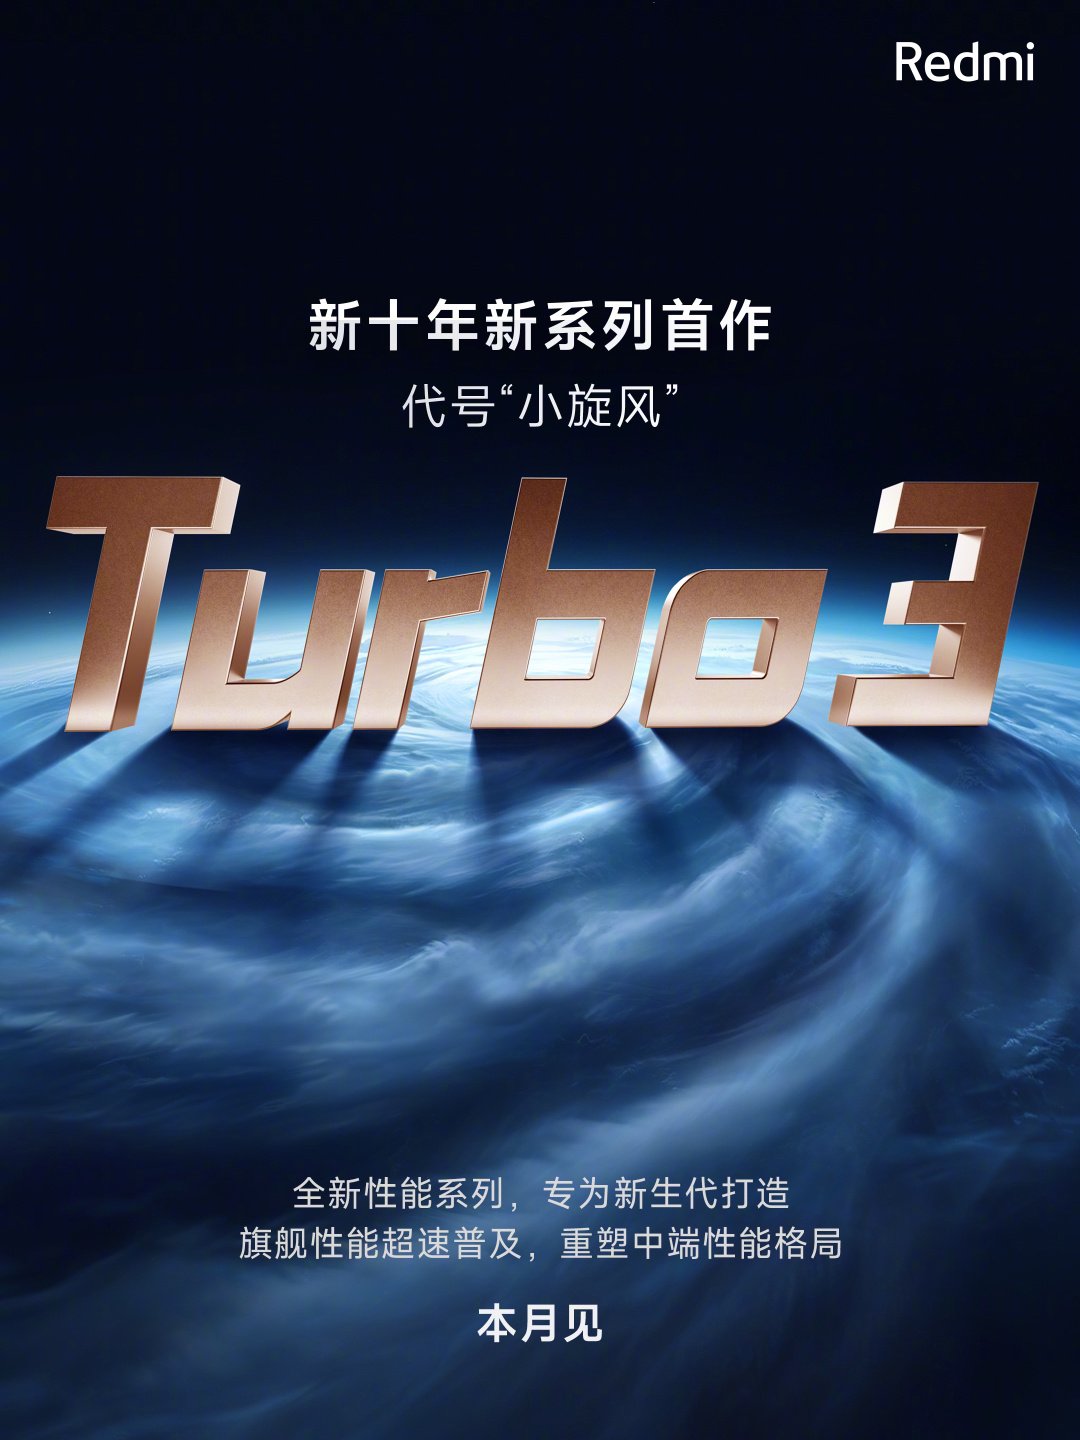 Redmi Turbo 3 moniker officially confirmed, likely to launch this month - News - News